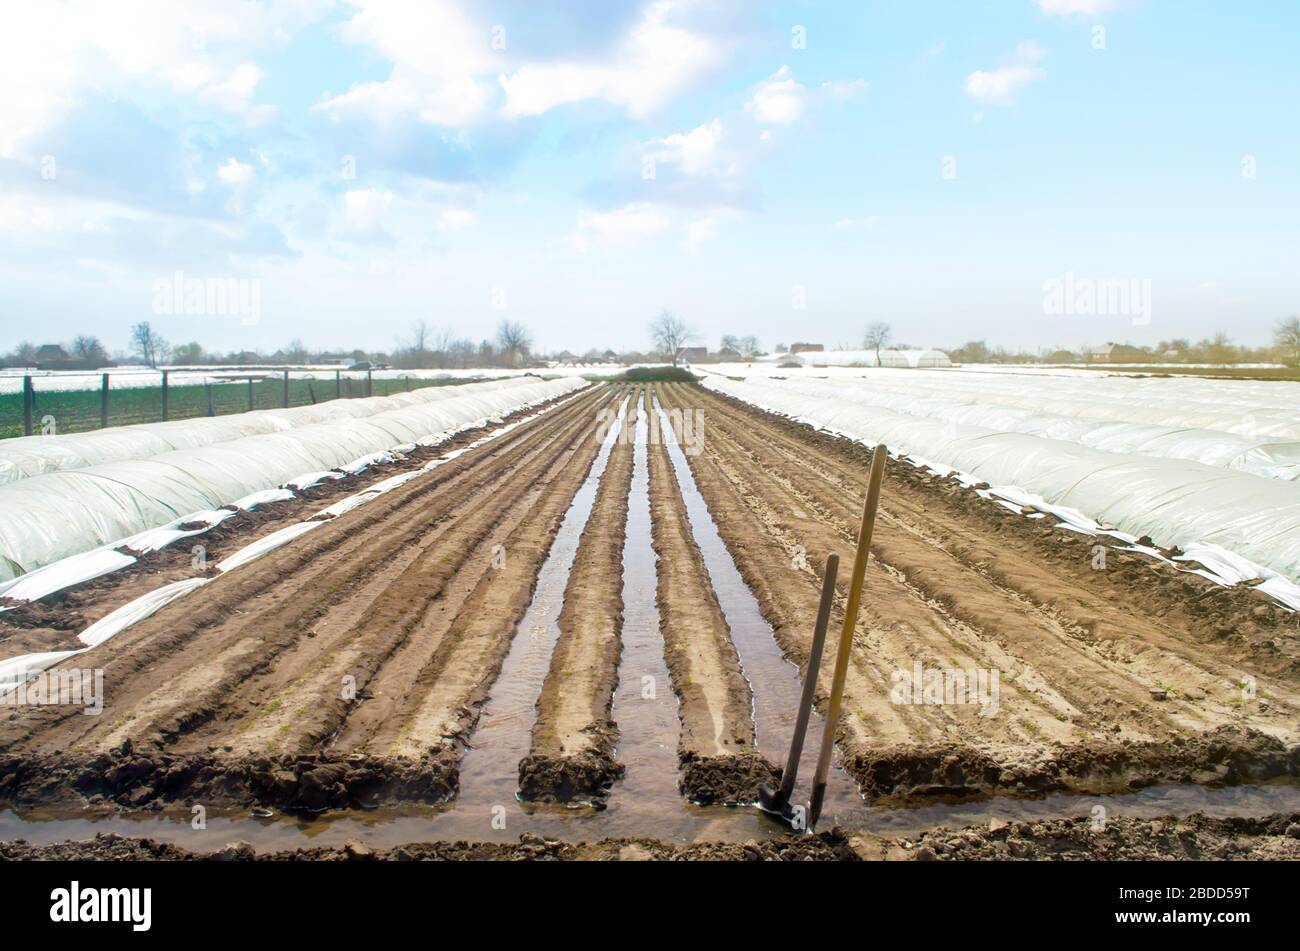 Watering rows of carrot plantations in an open way. Heavy copious irrigation after sowing seeds. New farming planting season. Moisturize soil and stim Stock Photo